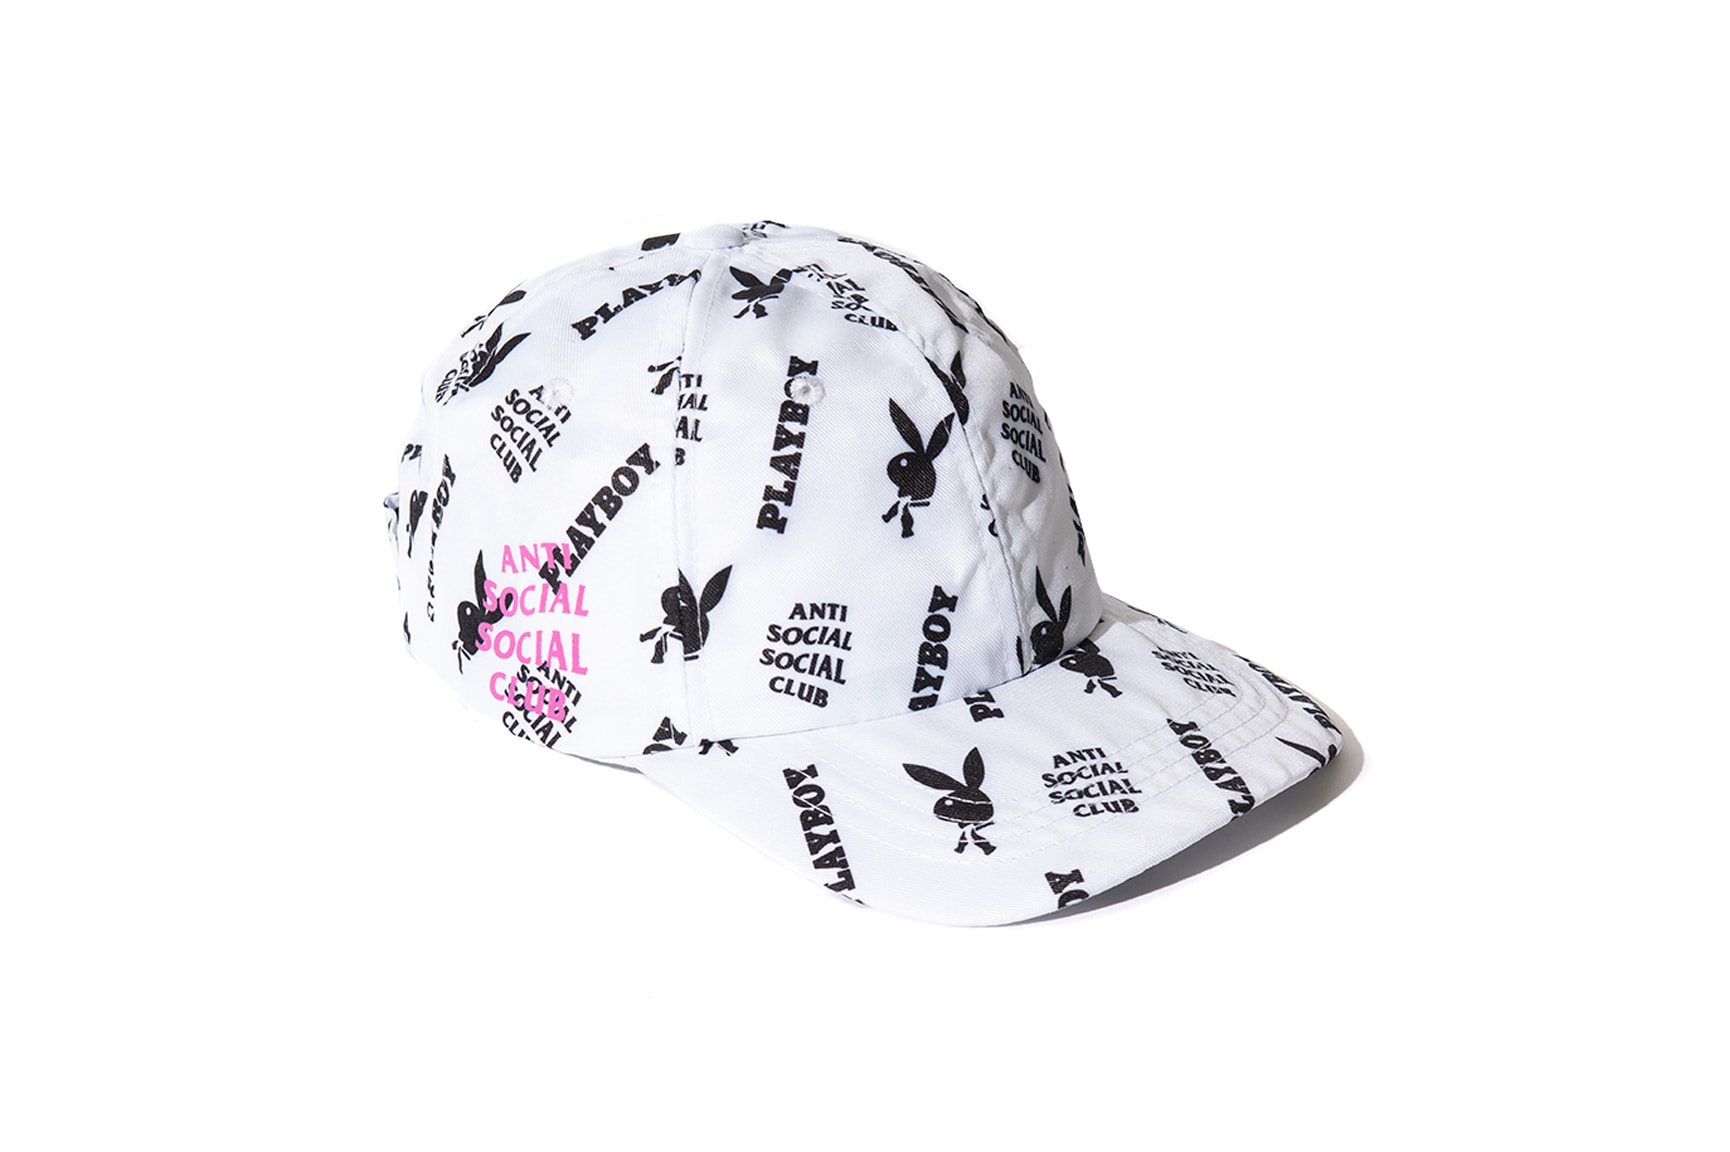 playboy white label anti social social club collaboration collection july 13 2018 white cap hat rabbit head bunny print bow tie branding